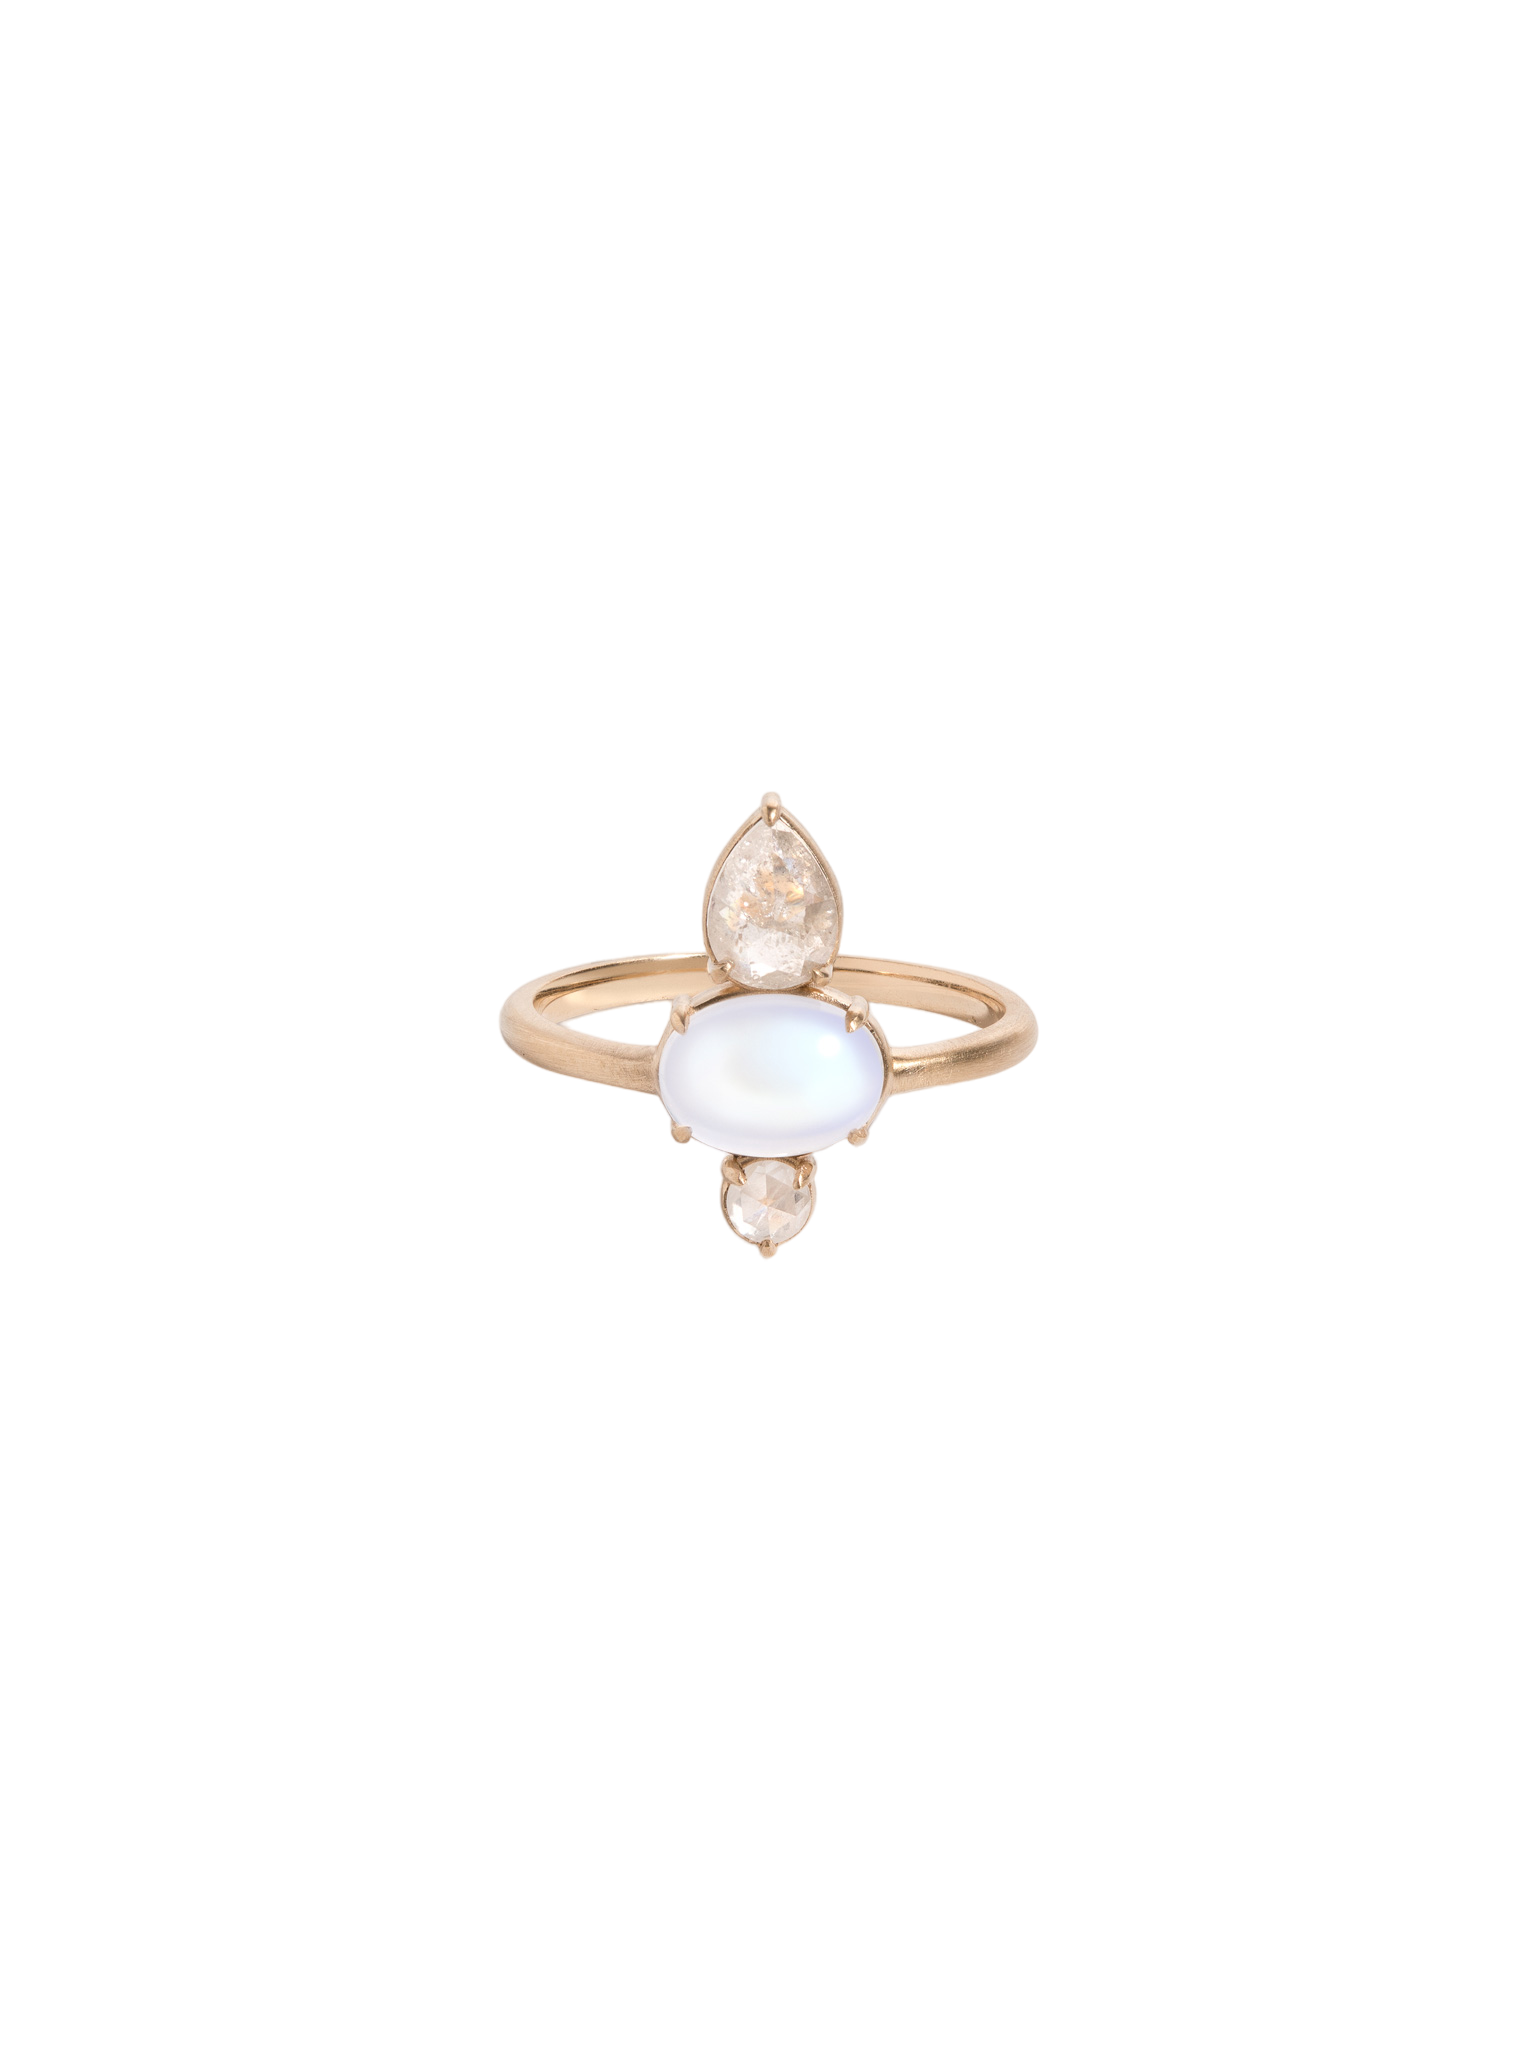 Moonstone temple ring